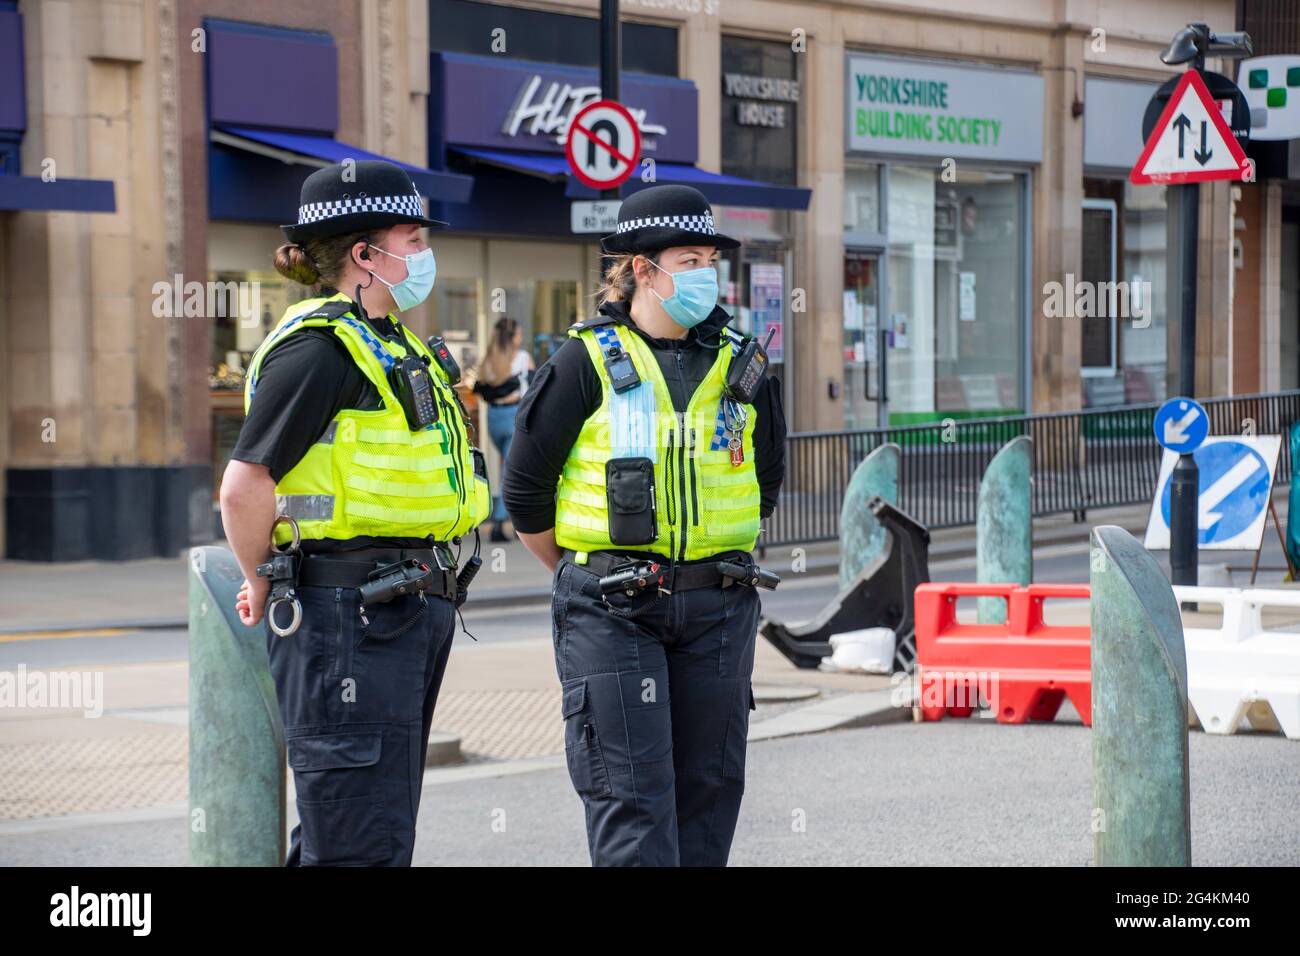 Sheffield UK: 17th April 2021: Two policewomen wearing masks policing the streets of Sheffield city centre as it reopens after the pandemic lockdown, Stock Photo